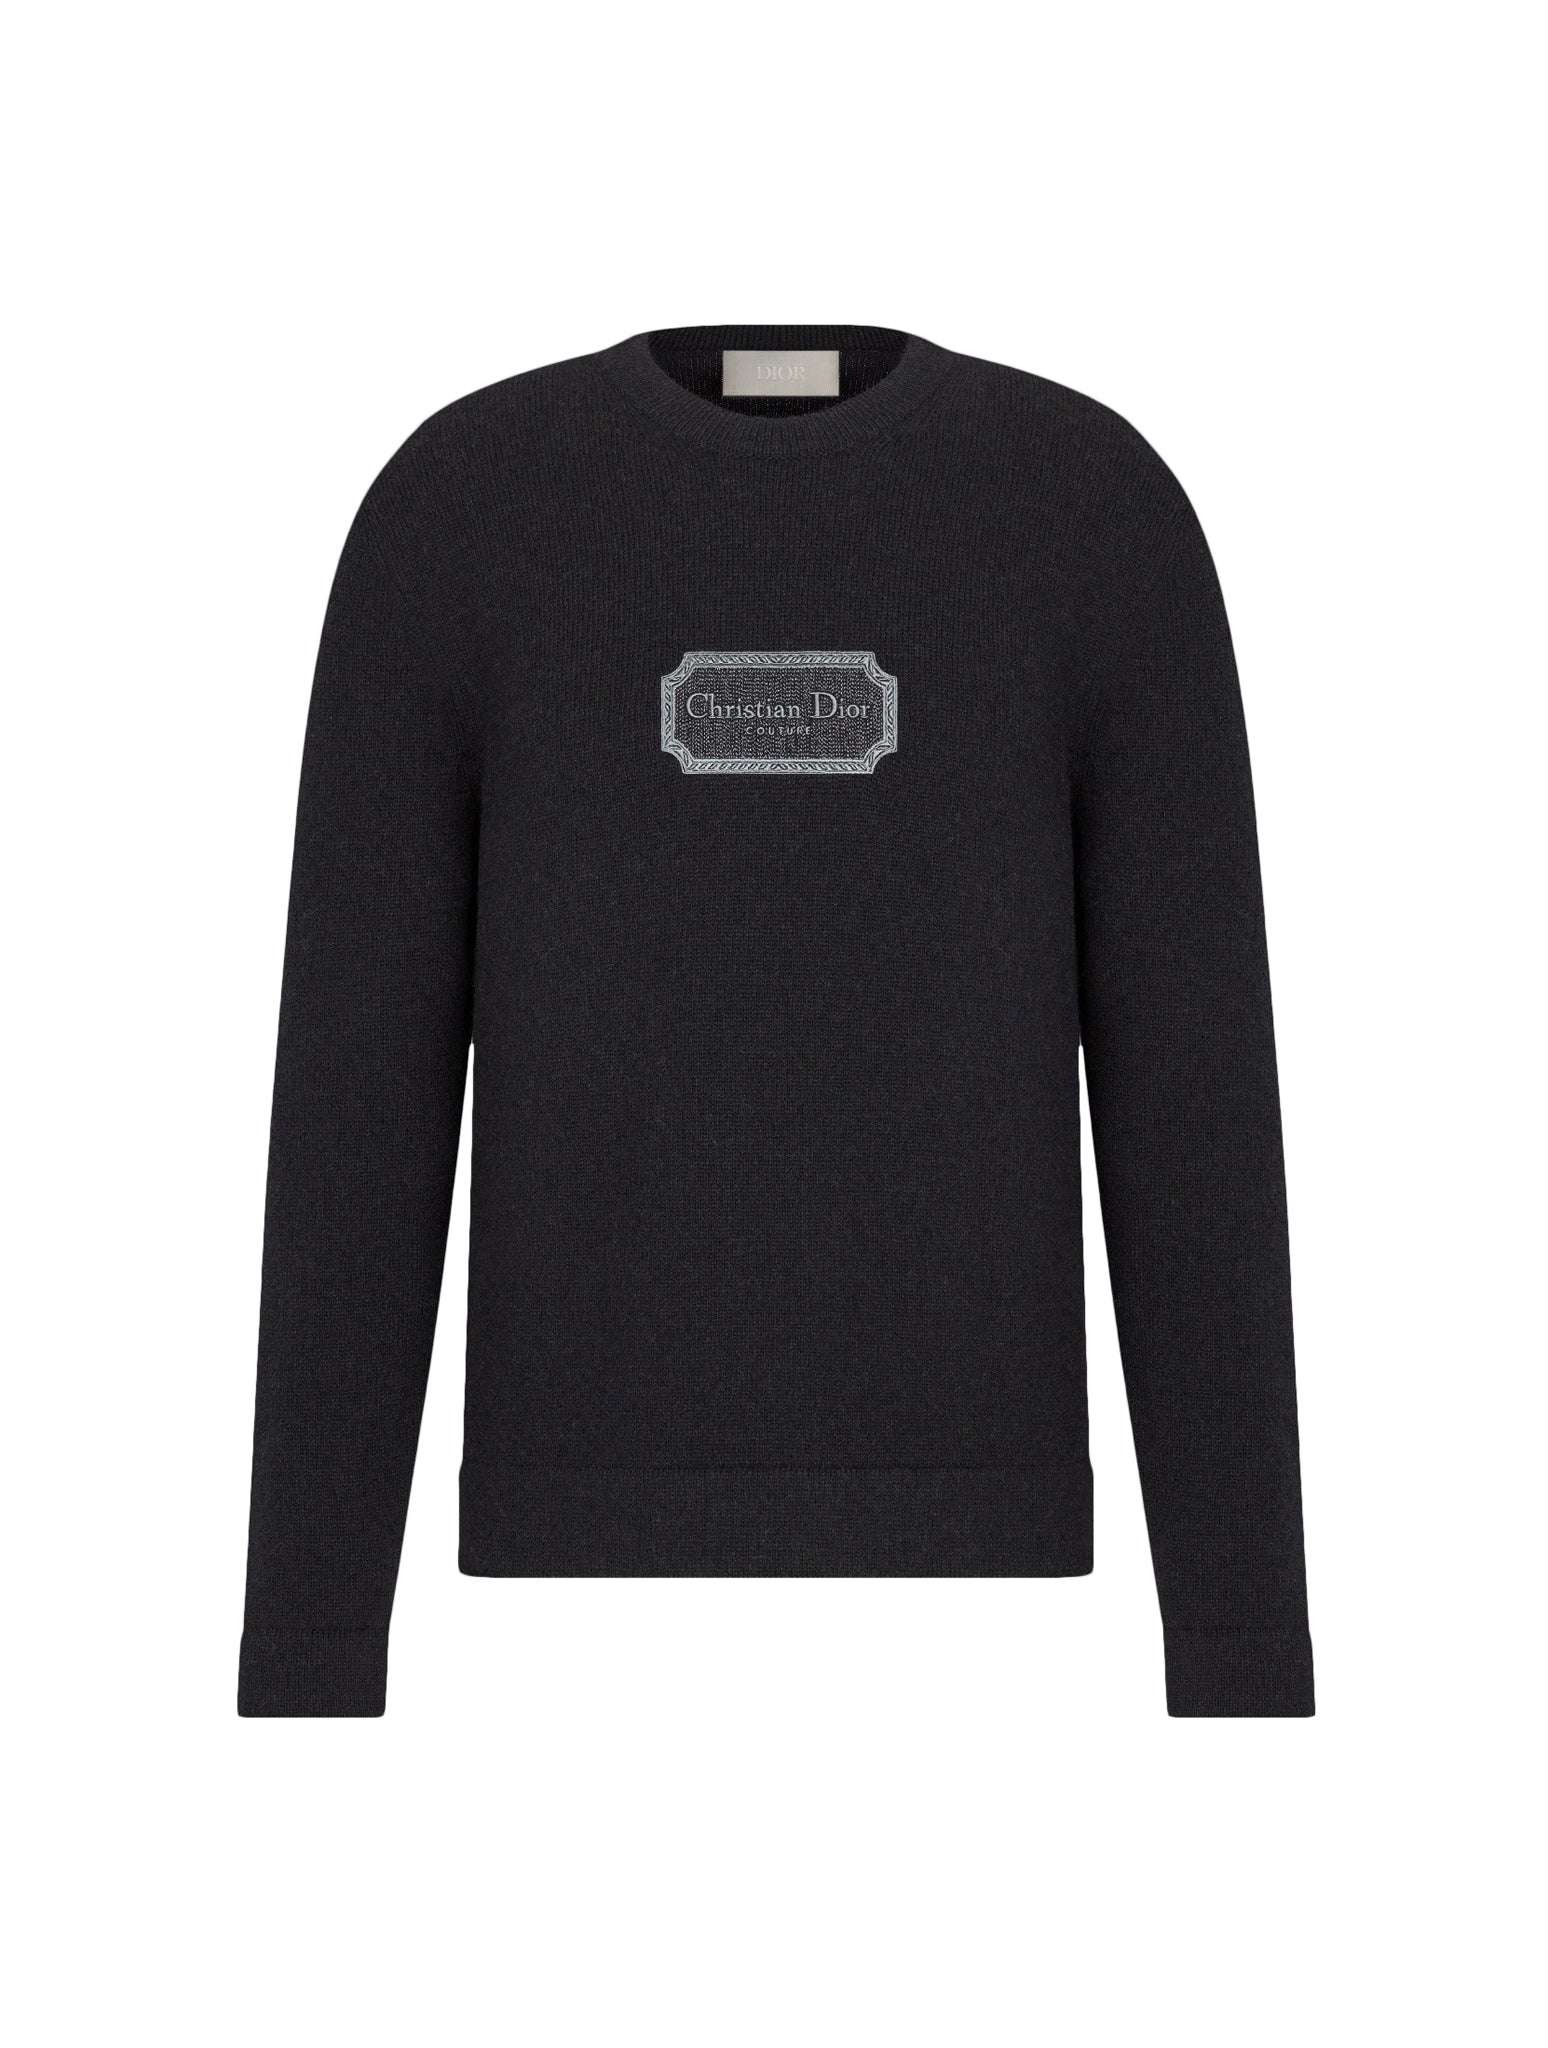 CHRISTIAN DIOR COUTURE SWEATER